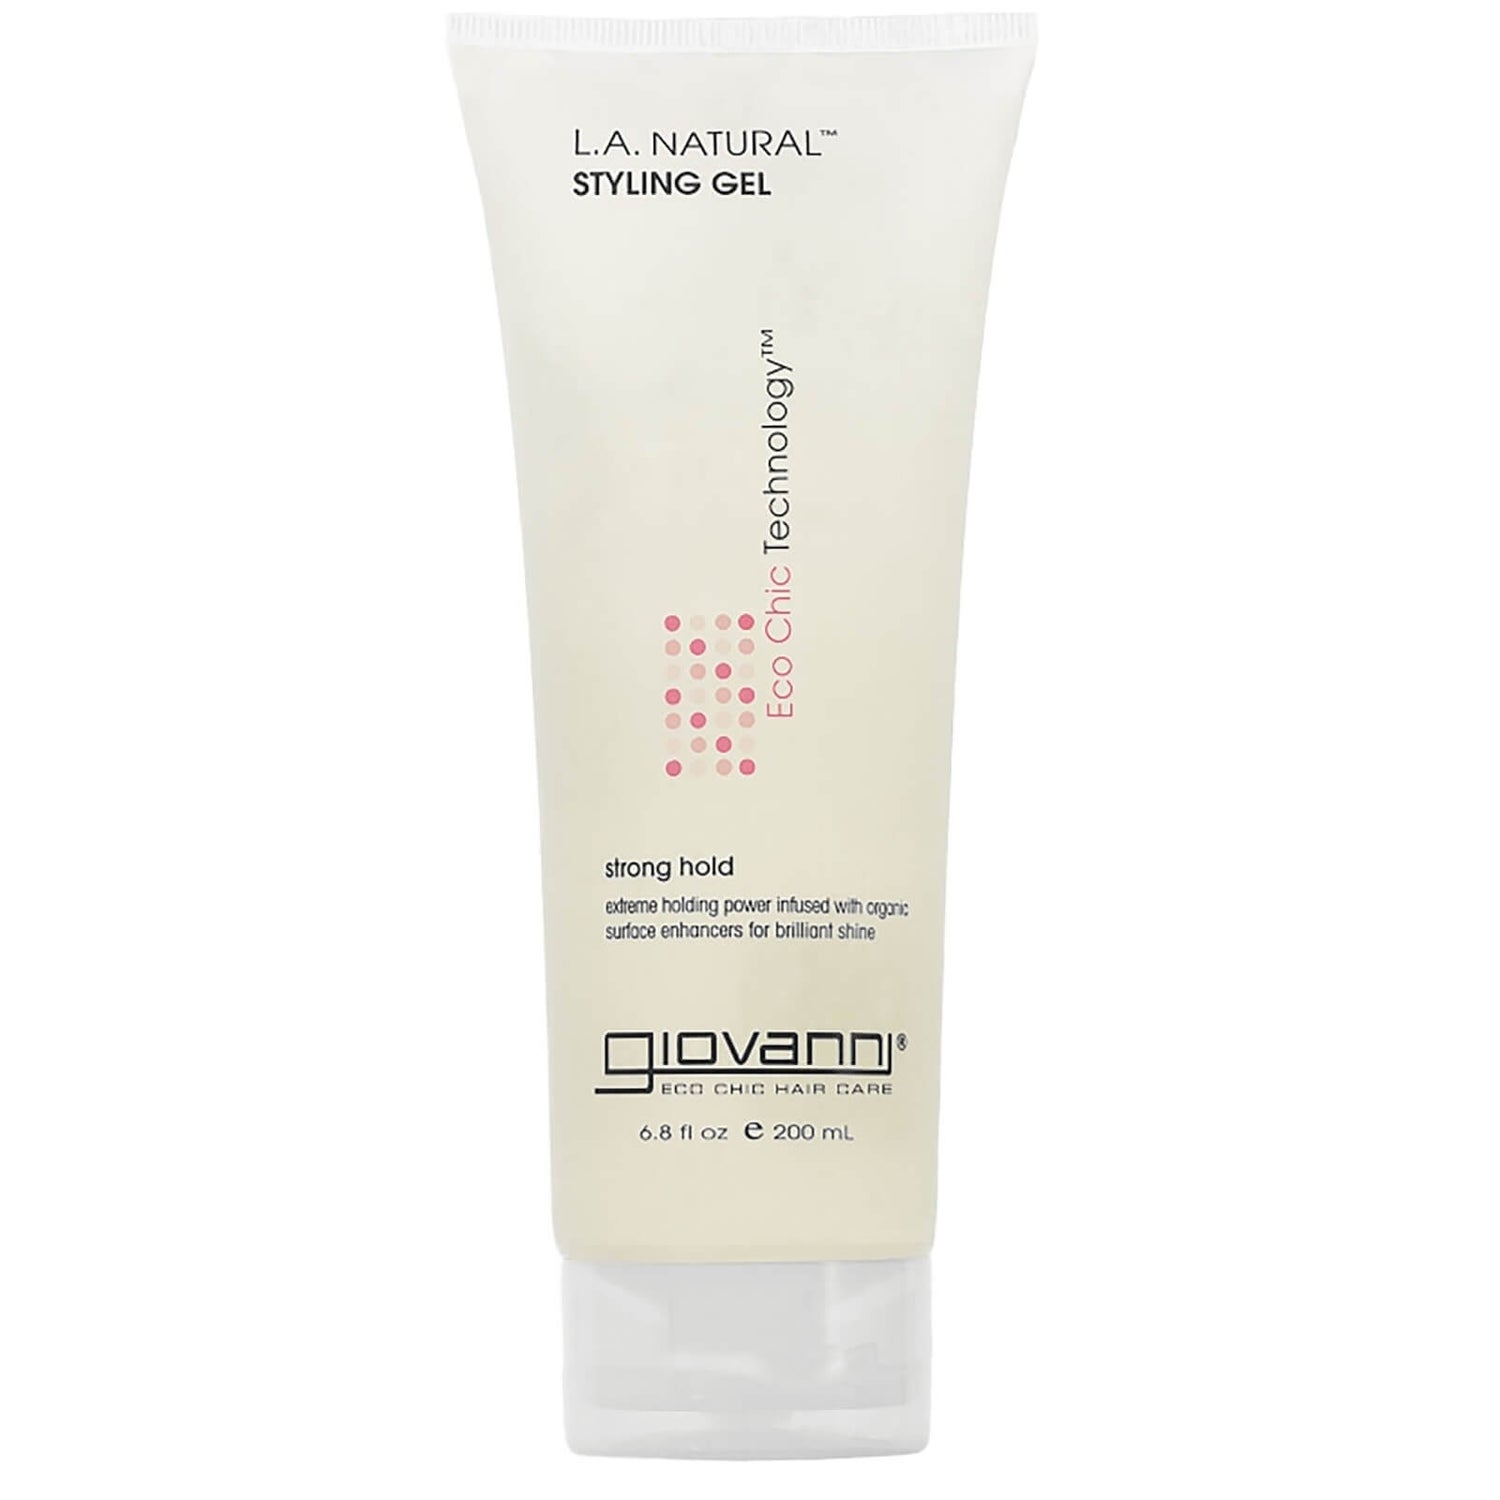 Giovanni L.A. gel styling naturale 60 ml